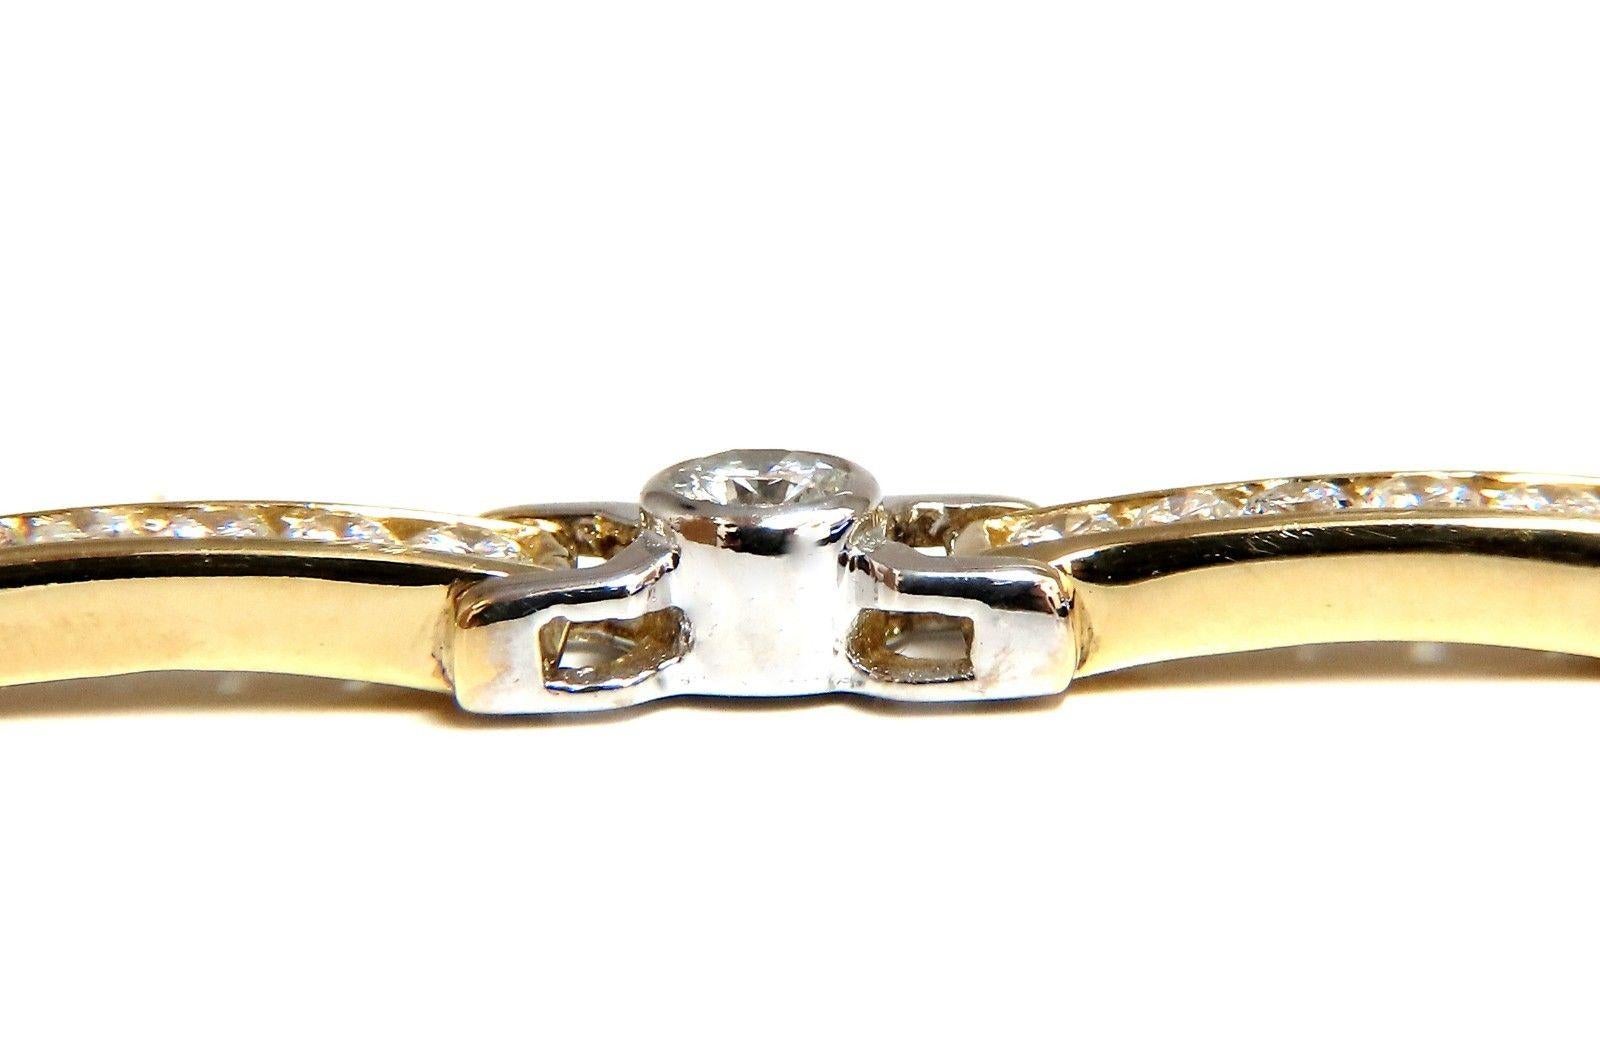 Channel & Flush Bezel Smooth Link Bracelet
5.05ct. natural diamonds.

Rounds, Full cut brilliants

H colors Si-1 clarity.

14kt. yellow & white gold

17.8 Grams.

7.25 Inches long (wearable length)

5.8mm wide

pressure clasp and safety catch